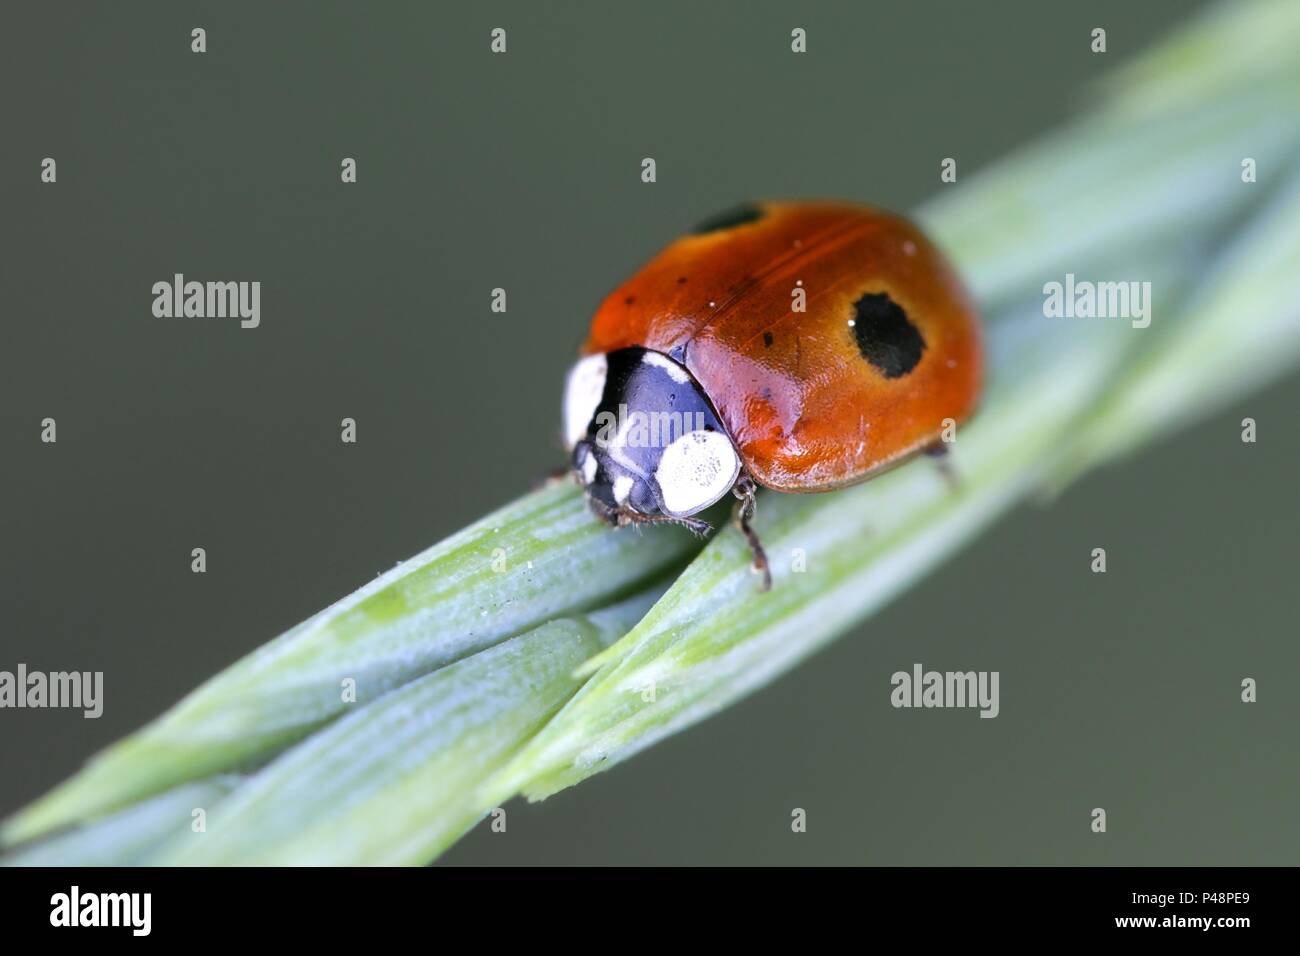 Two-spot ladybird or two-spotted ladybug,  Adalia bipunctata, used for biological pest control of aphids Stock Photo